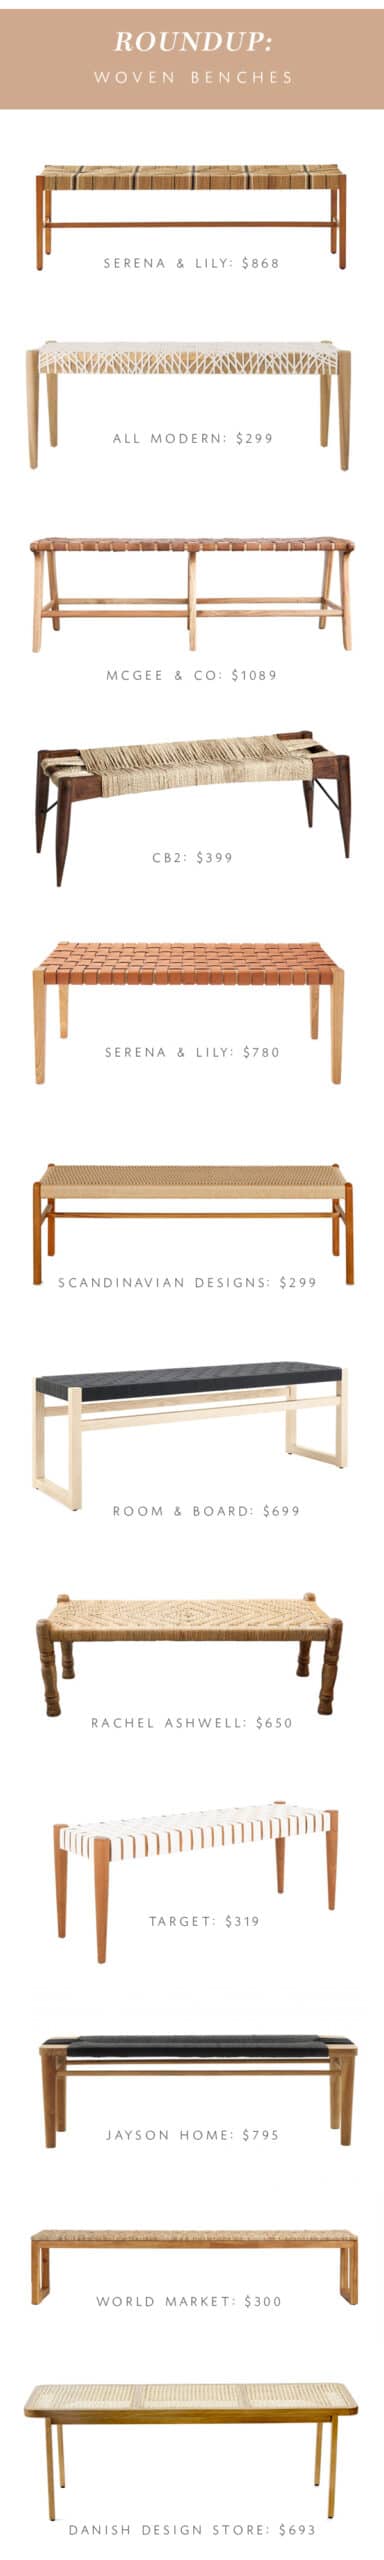 woven bench roundup on coco kelley